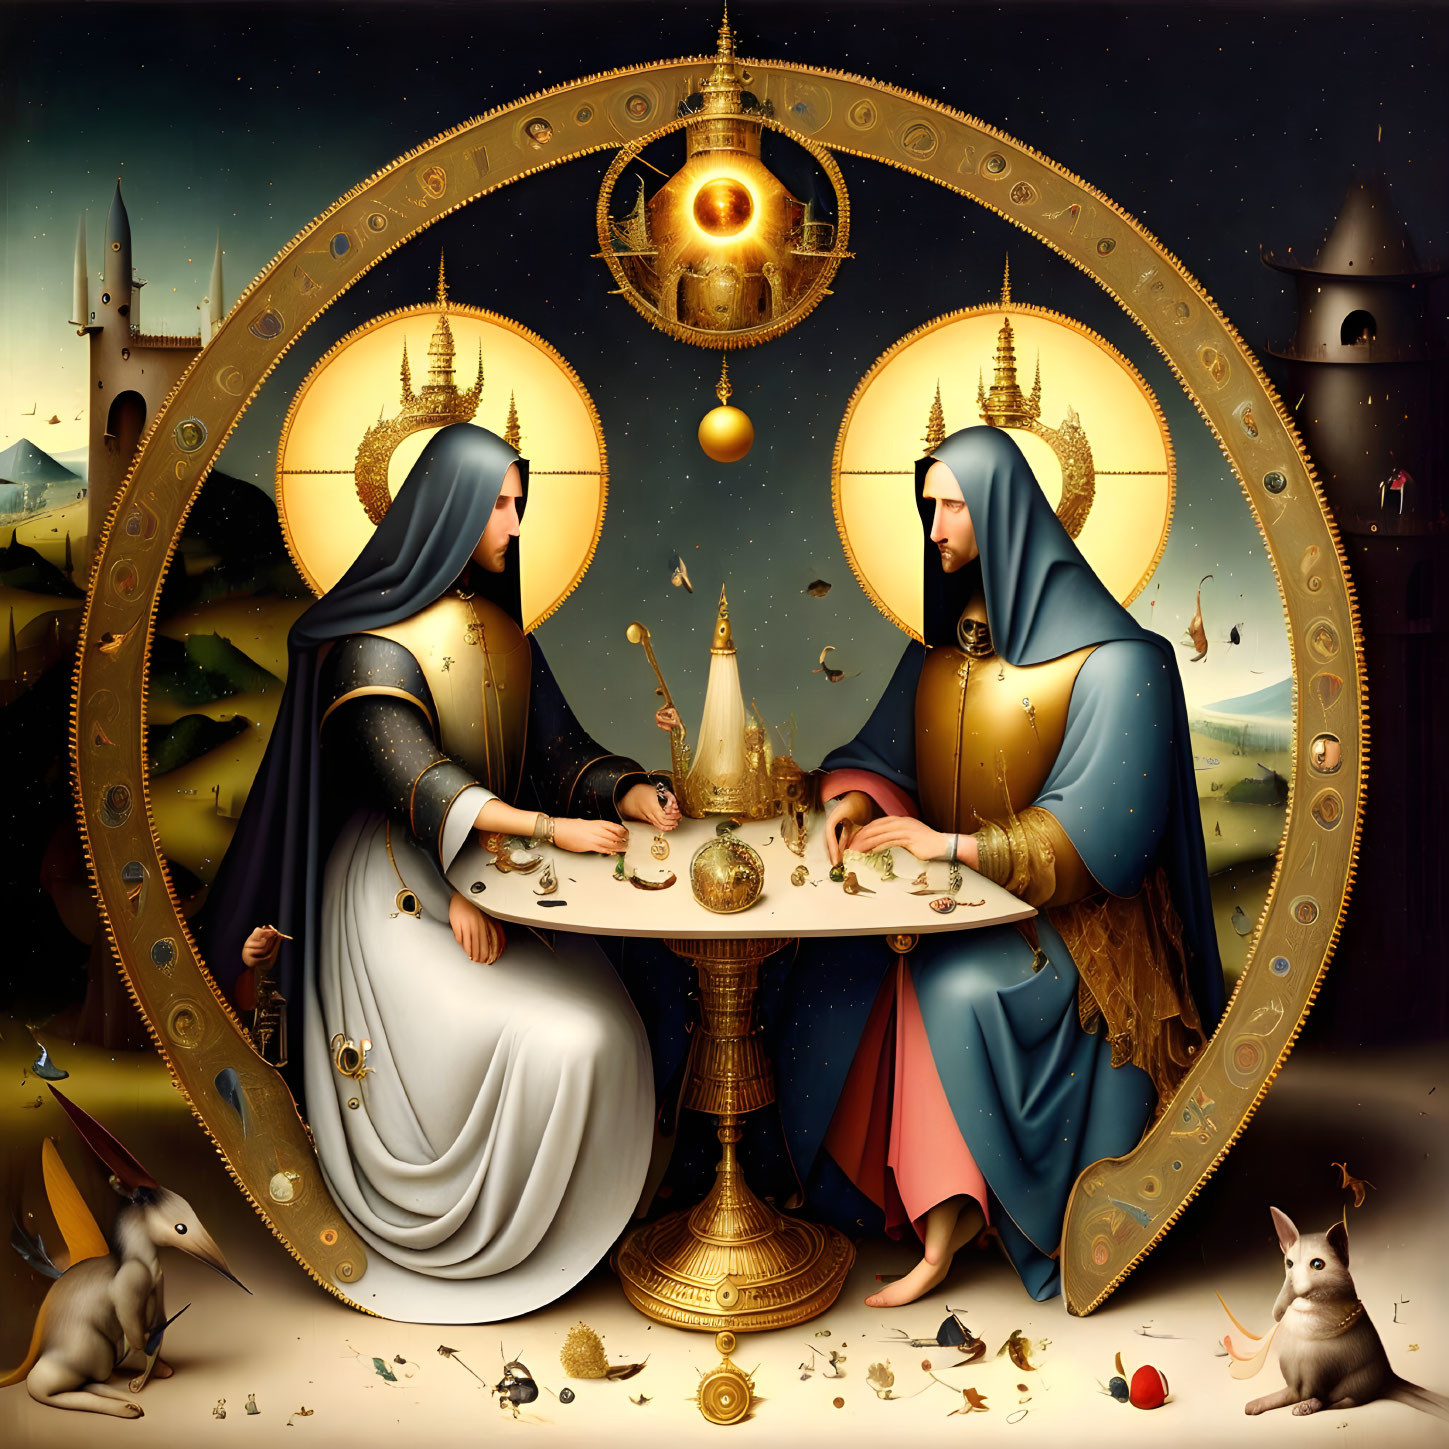 Two robed figures playing board game in surreal landscape with symbolic objects.